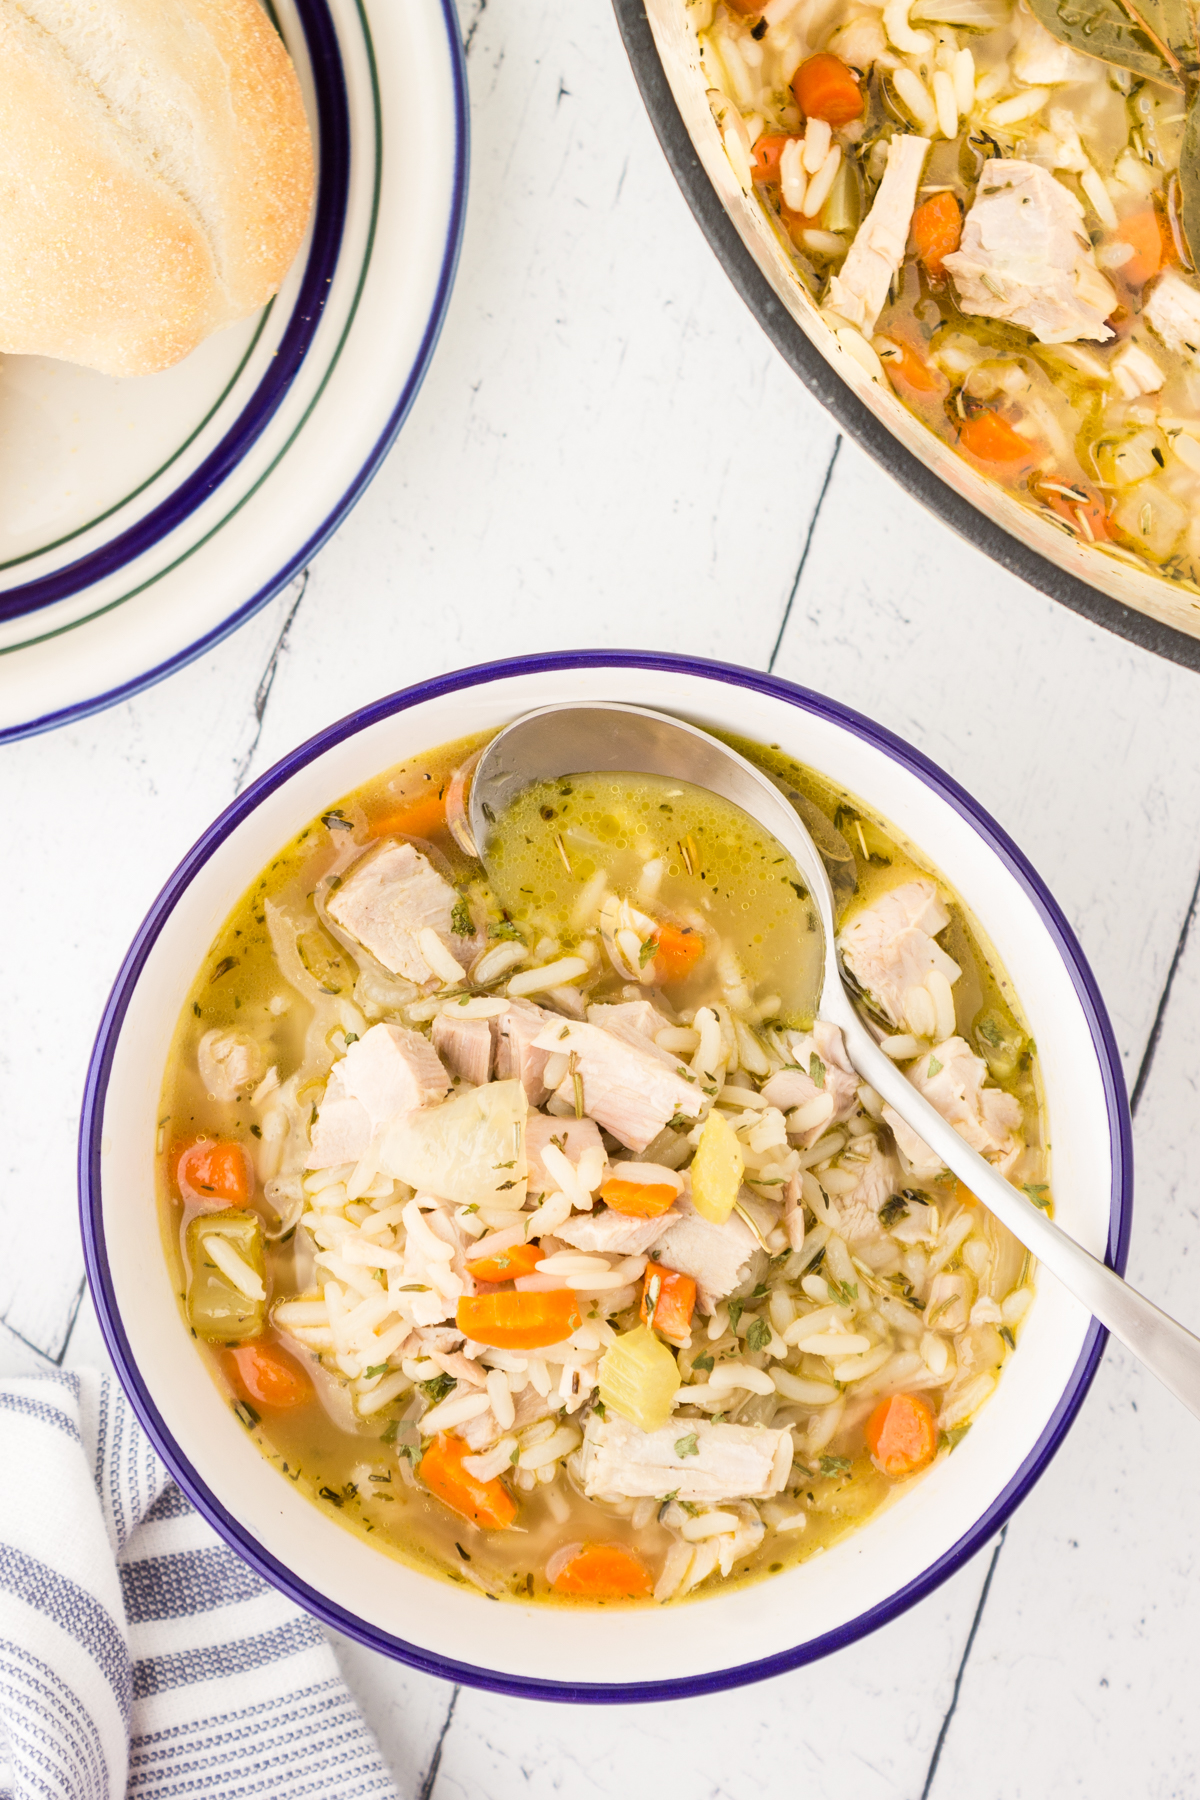 leftover turkey soup recipe made with carrots, celery and rice